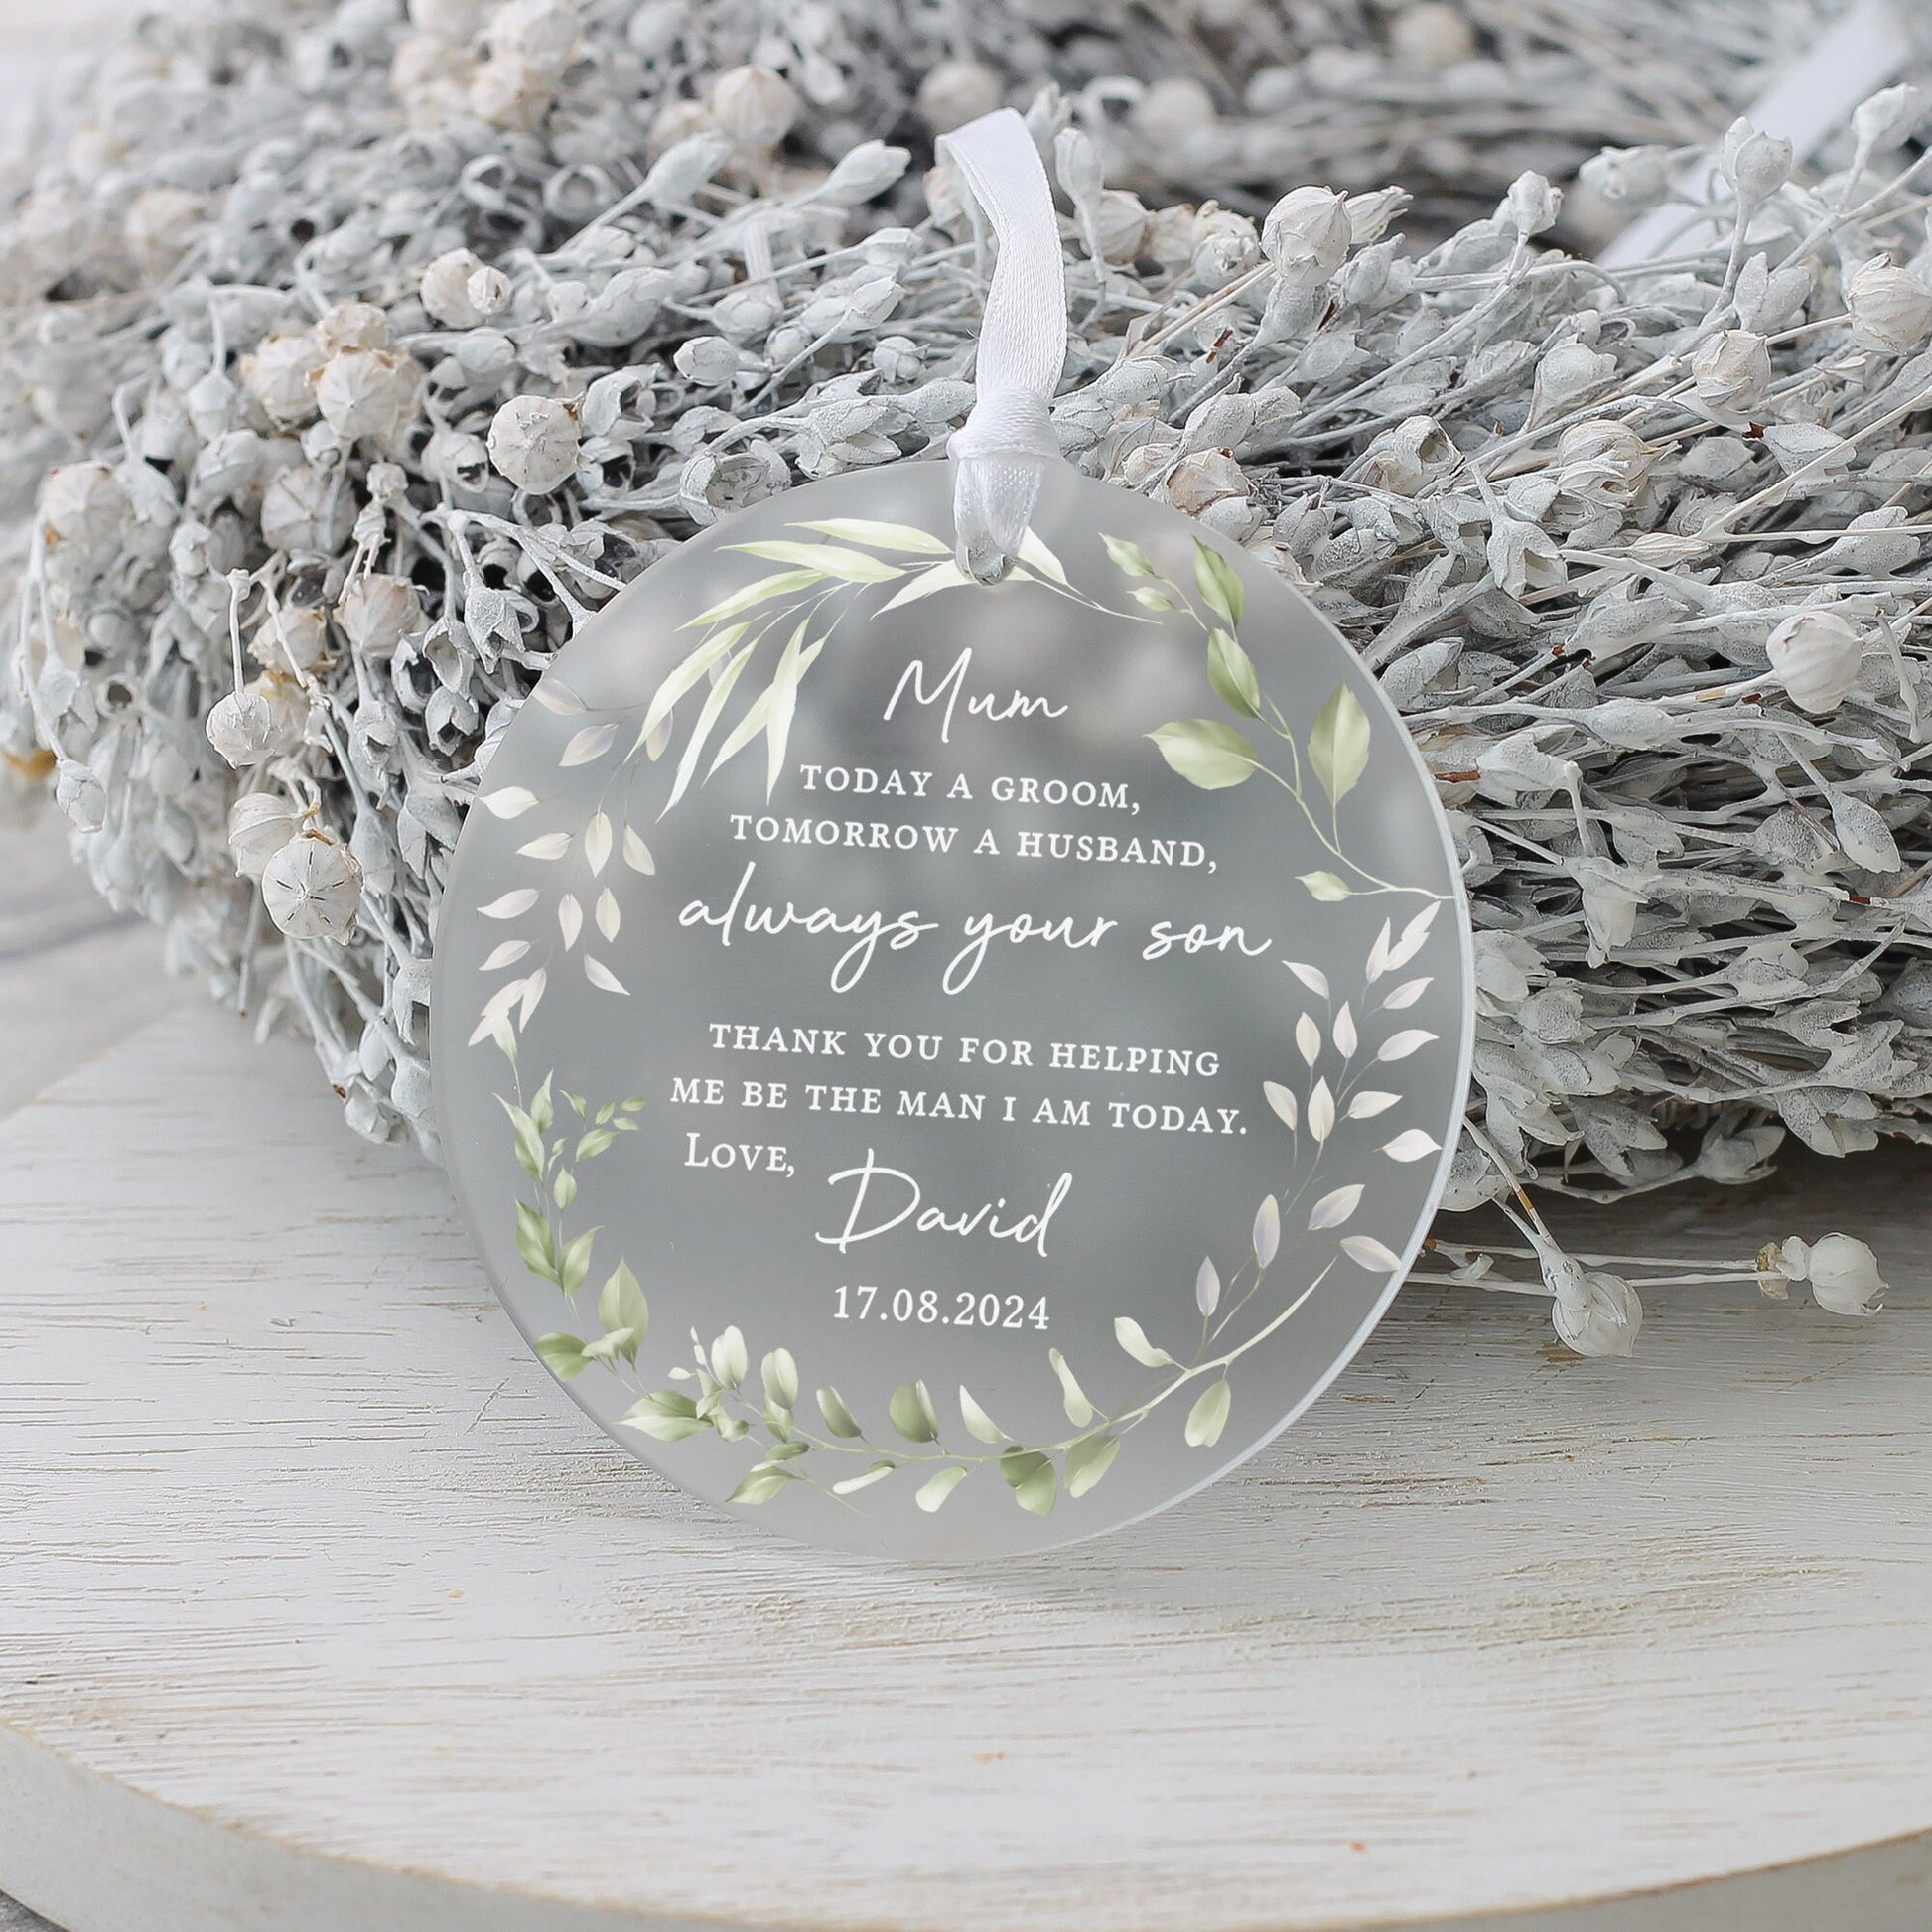 Personalised Mother of the Groom Gift, Groom to Mother, Gifts from Groom, Wedding Day Gifts, Mum of Groom Gifts, Father of Groom Gifts